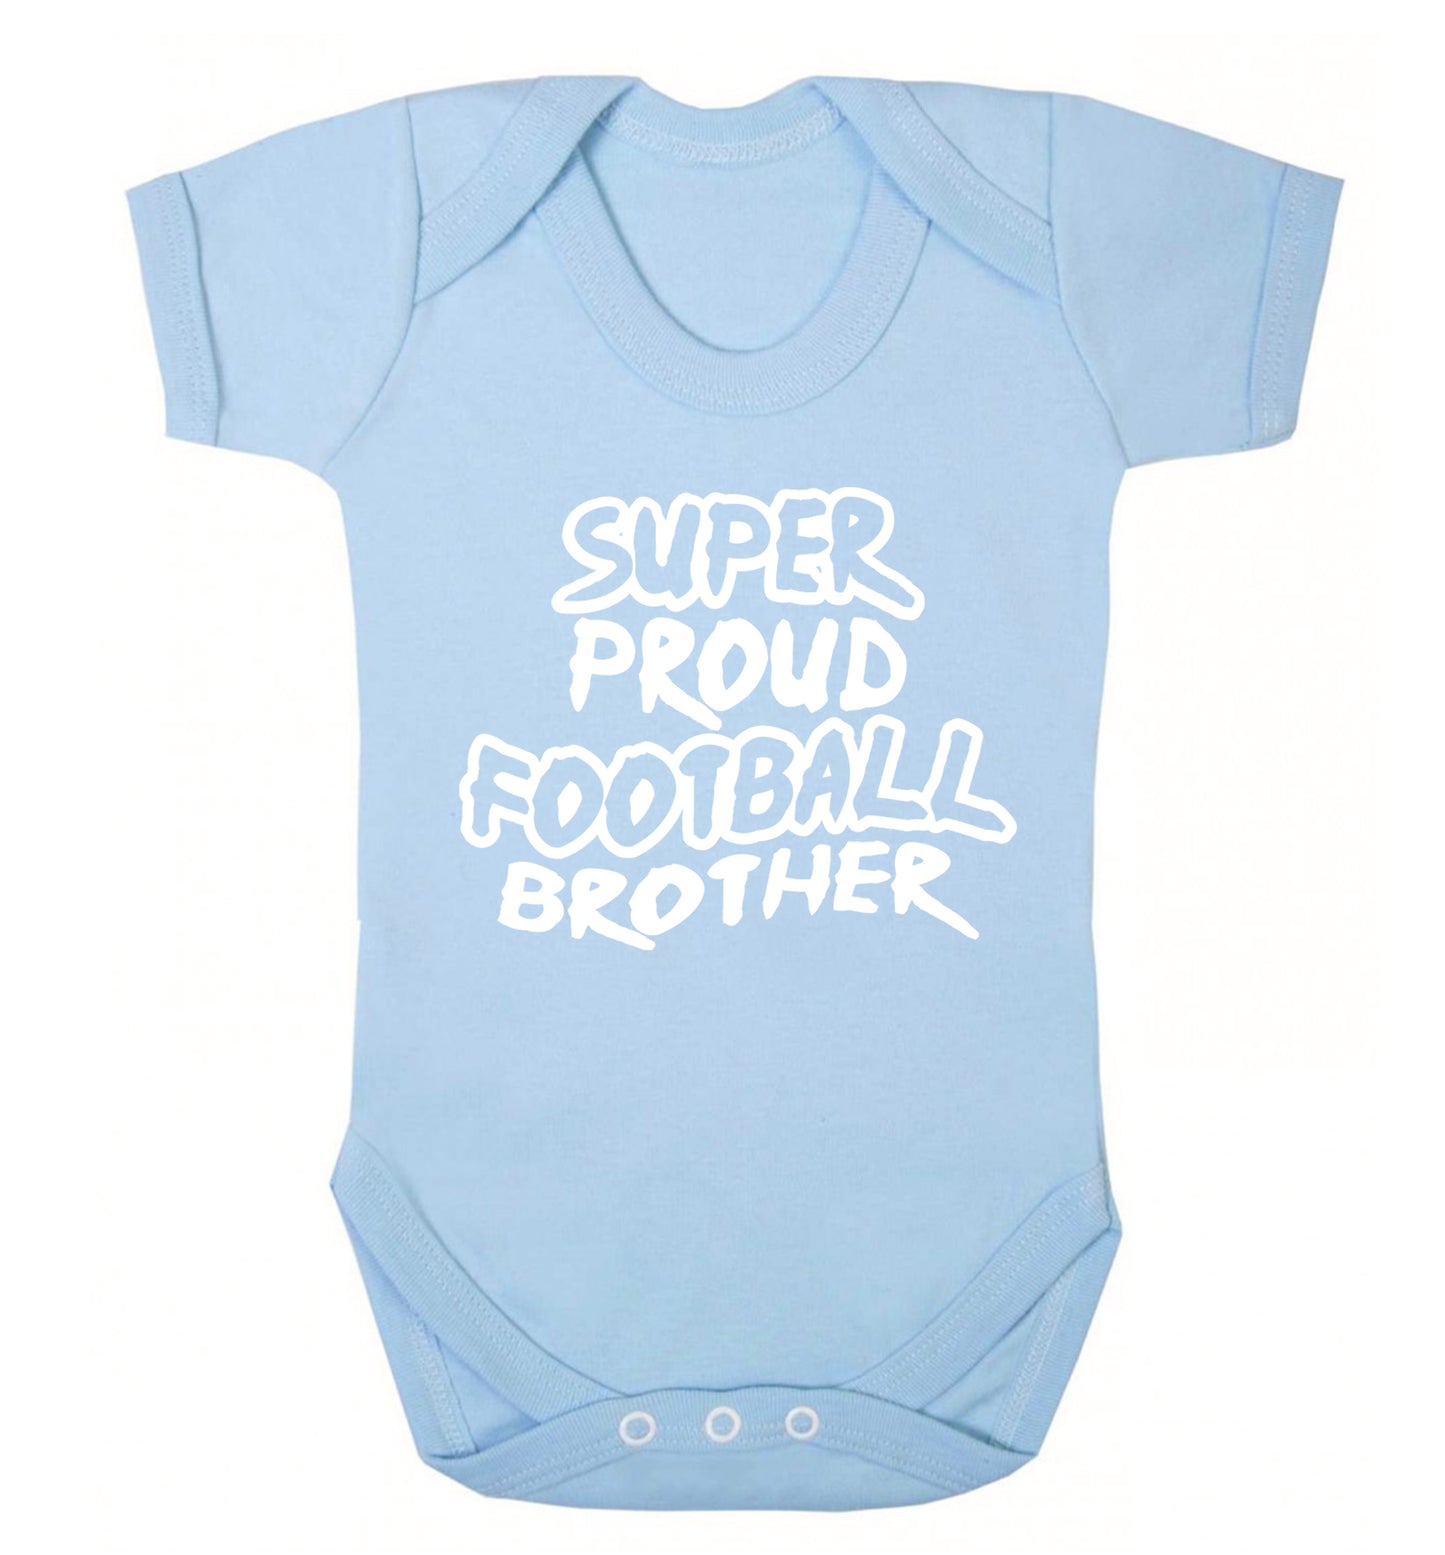 Super proud football brother Baby Vest pale blue 18-24 months